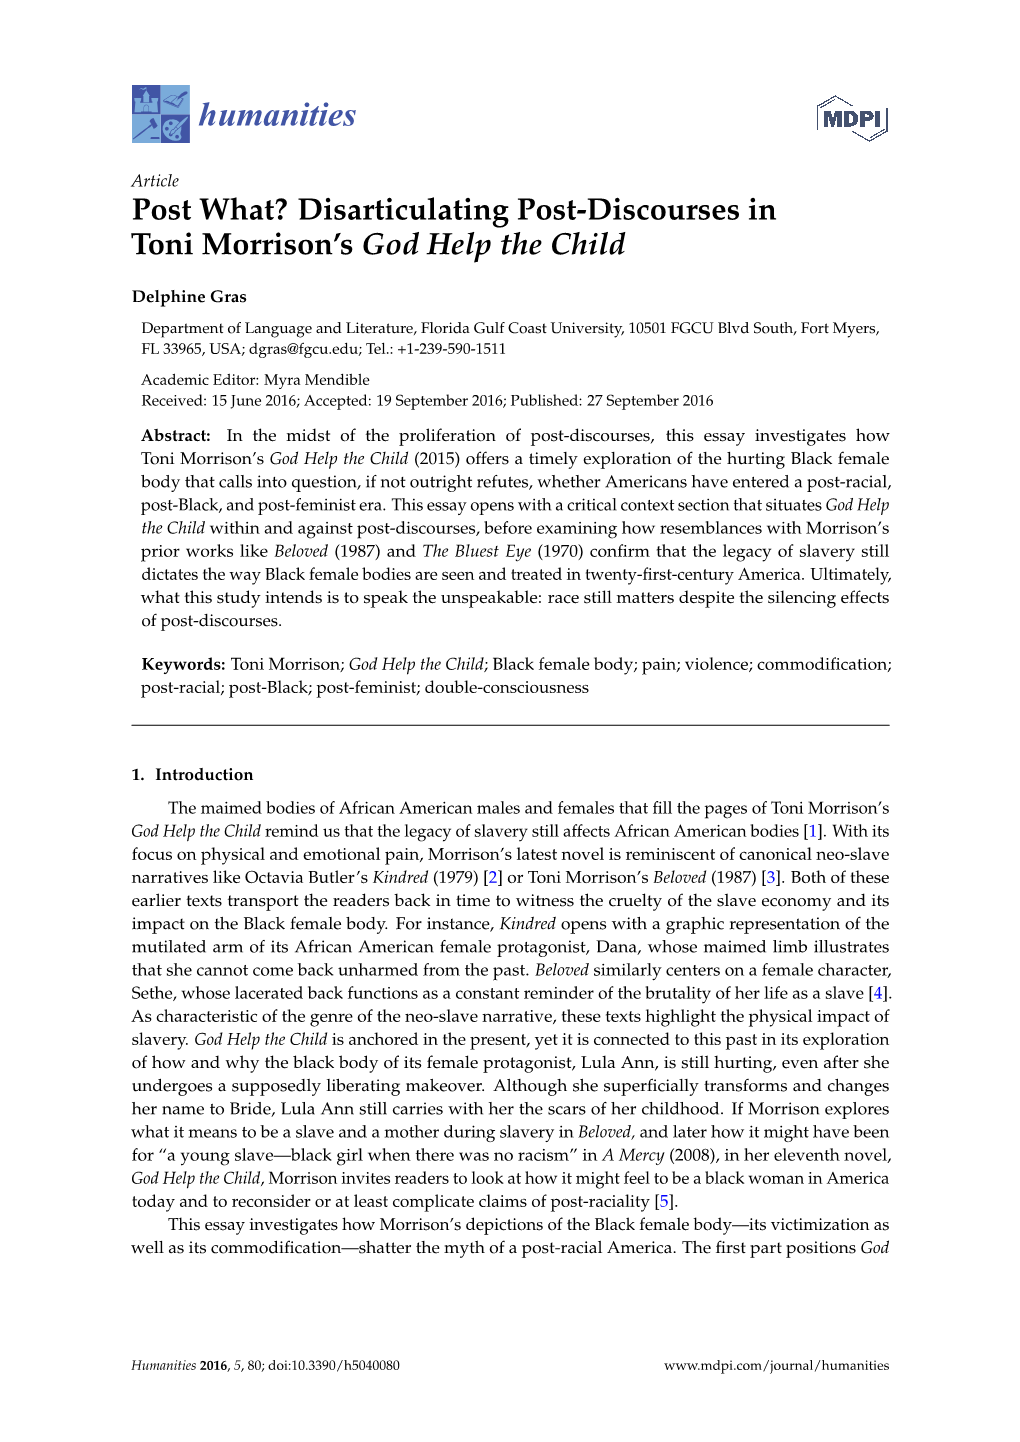 Disarticulating Post-Discourses in Toni Morrison's God Help the Child